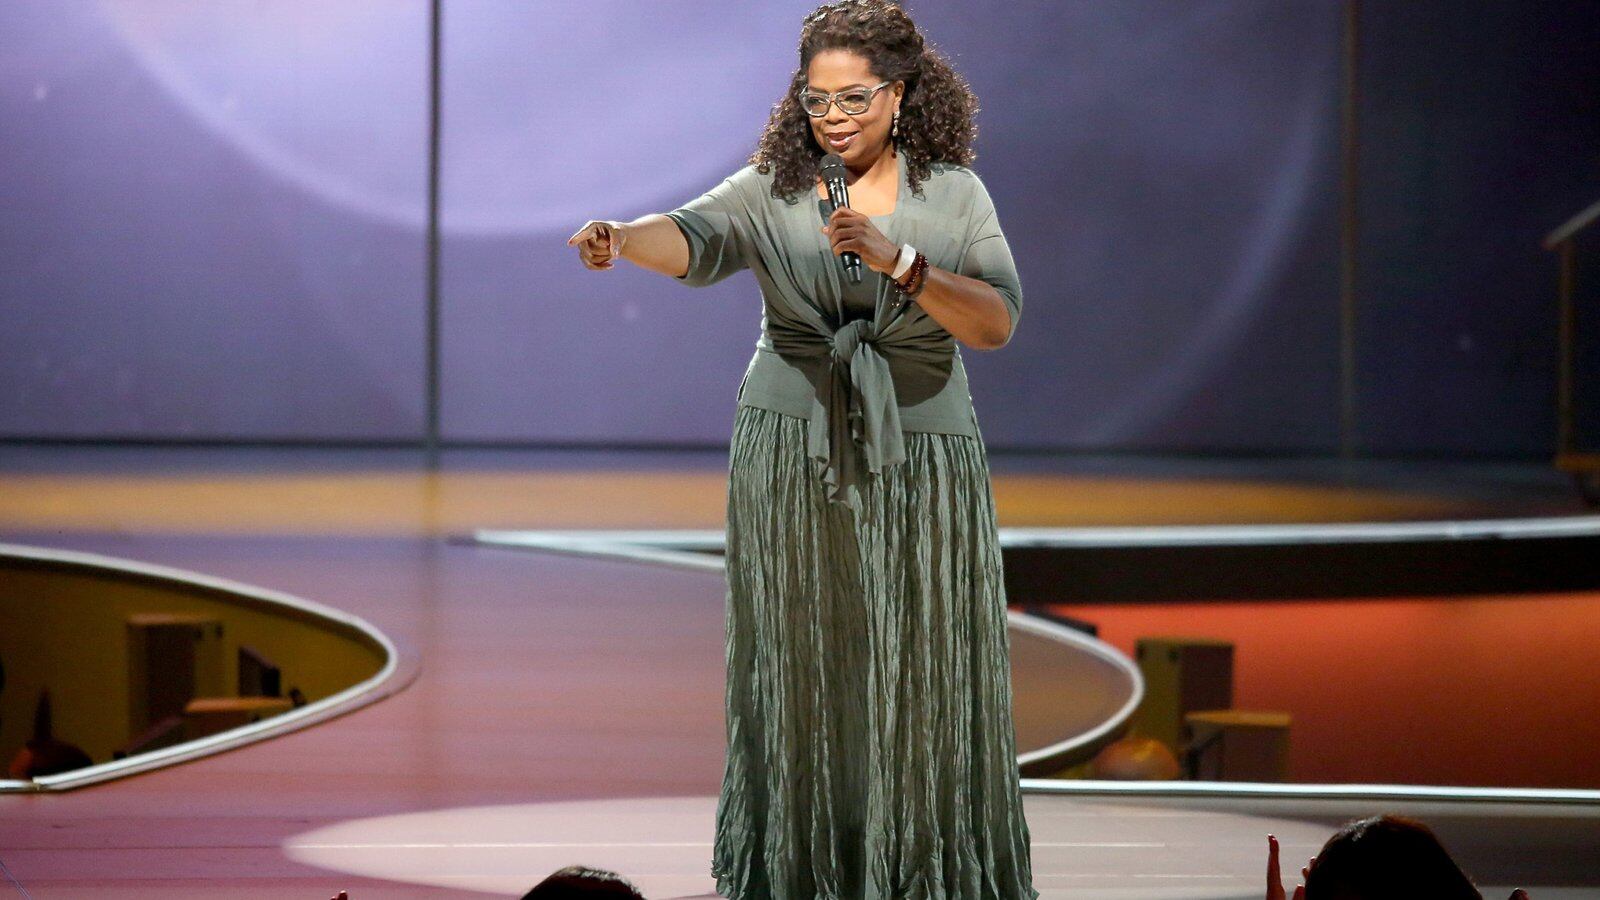 Oprah Winfrey at an event in Newark in 2014. On Thursday, Winfrey's charitable foundation announced a $5 million gift to Pathways to College, a nonprofit after-school program that supports high schoolers in Newark and other cities.